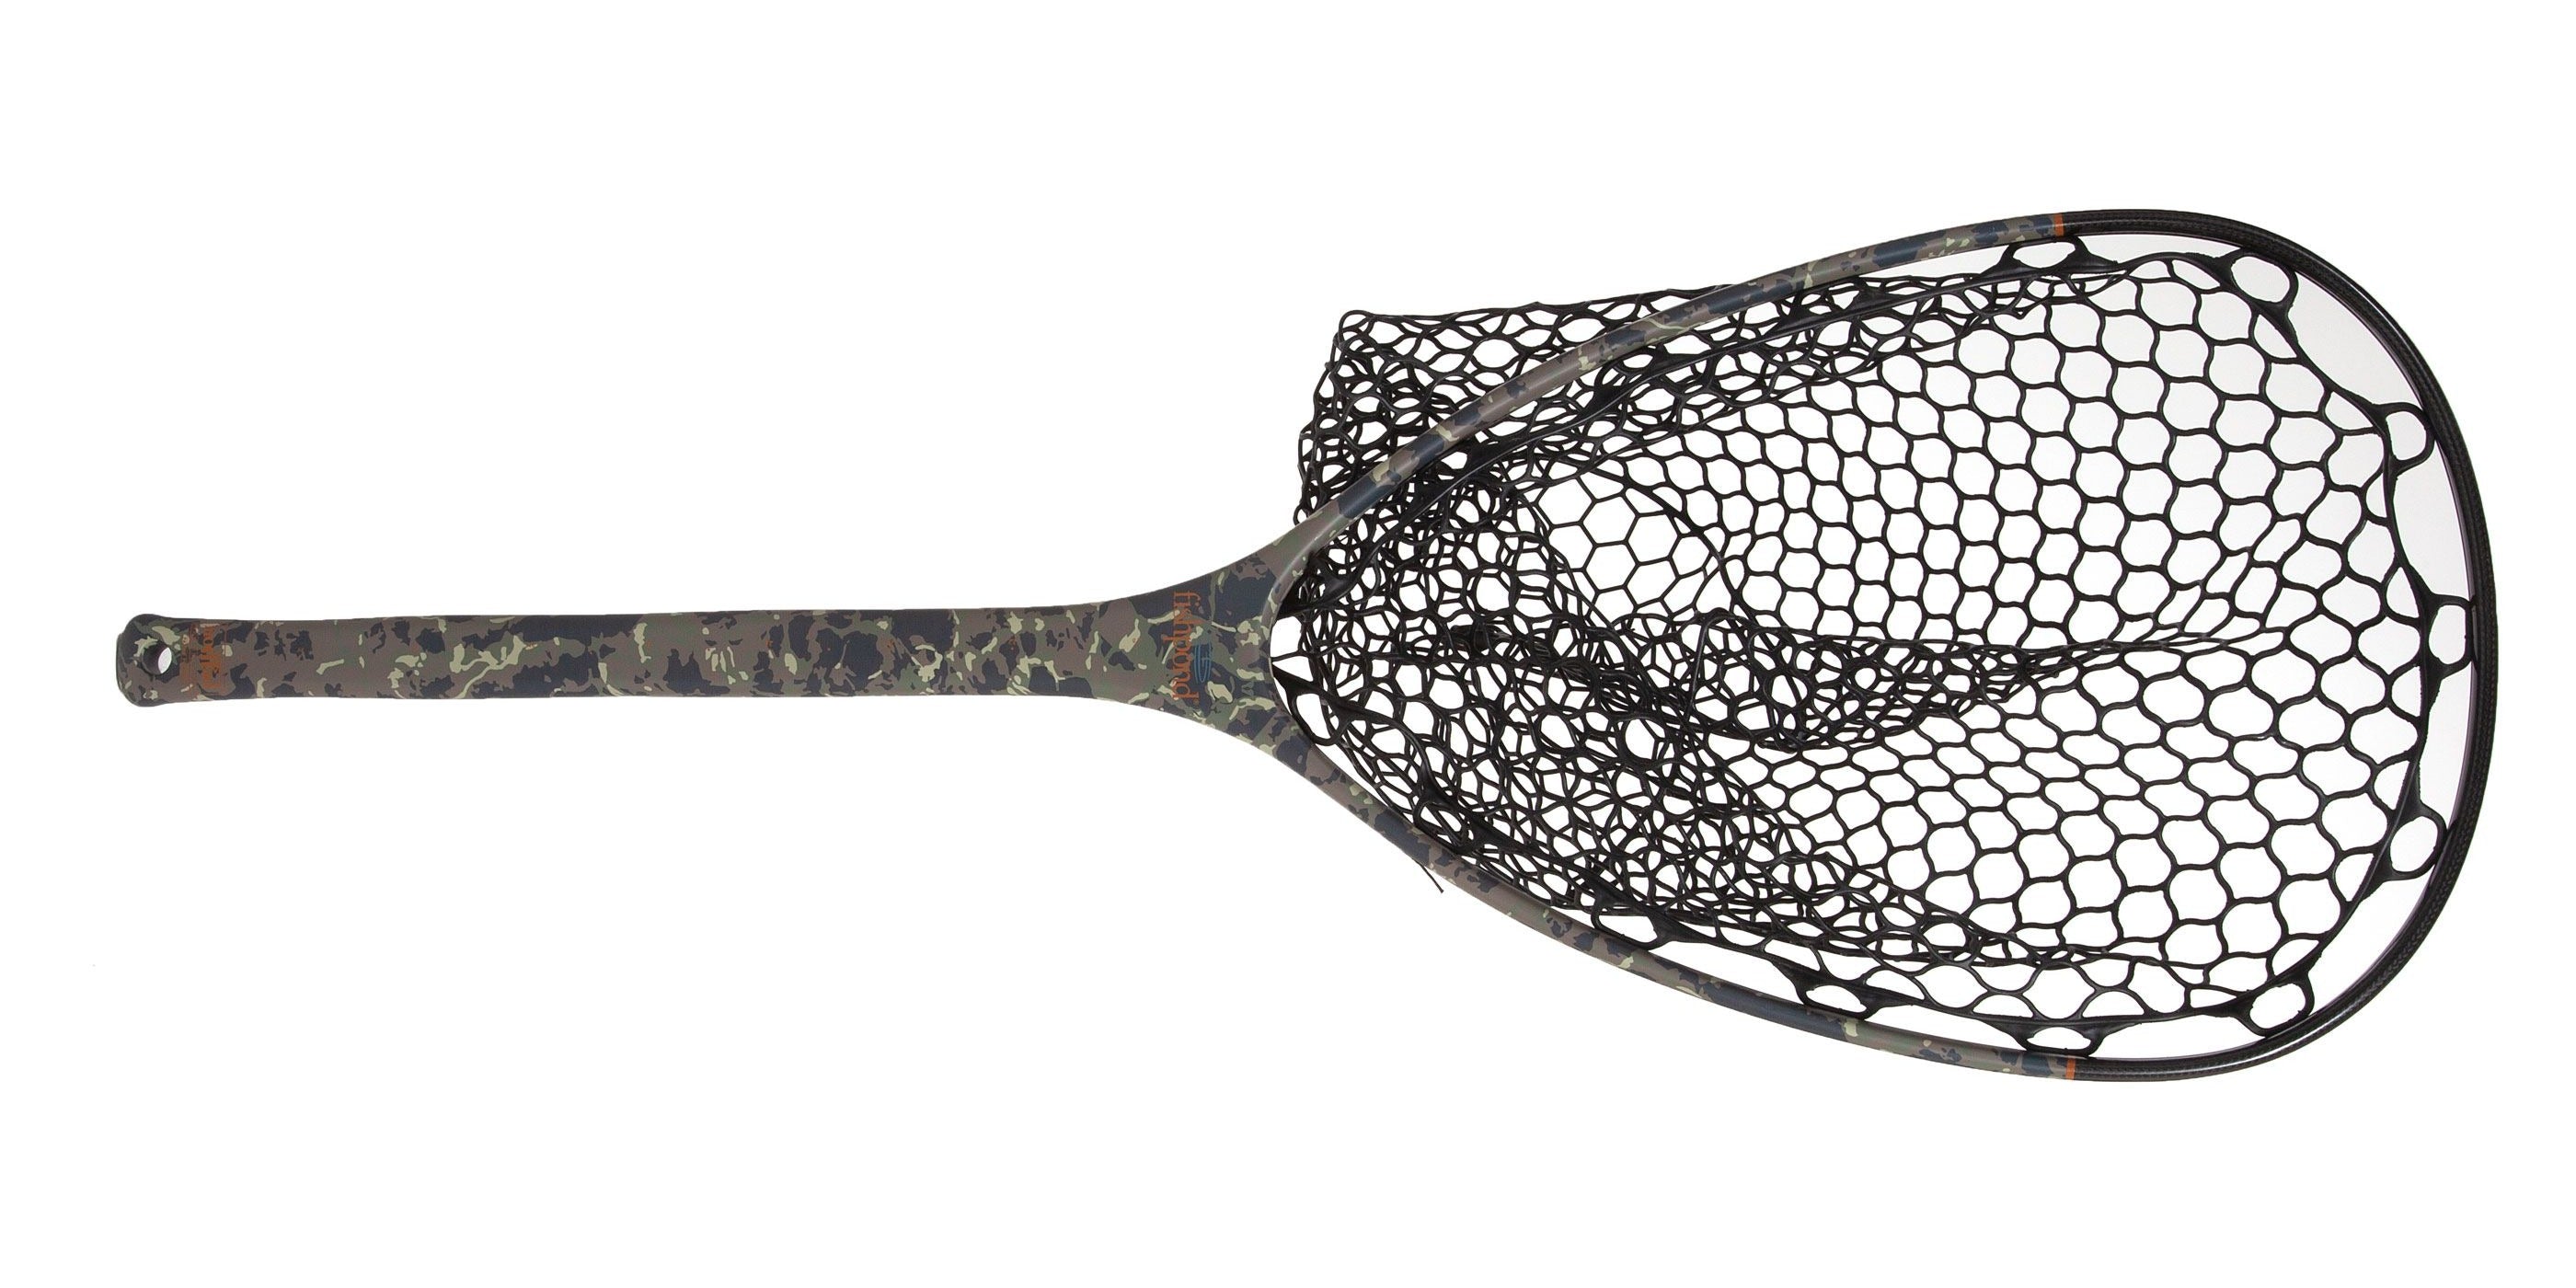 Fishpond Nomad Native Net Review